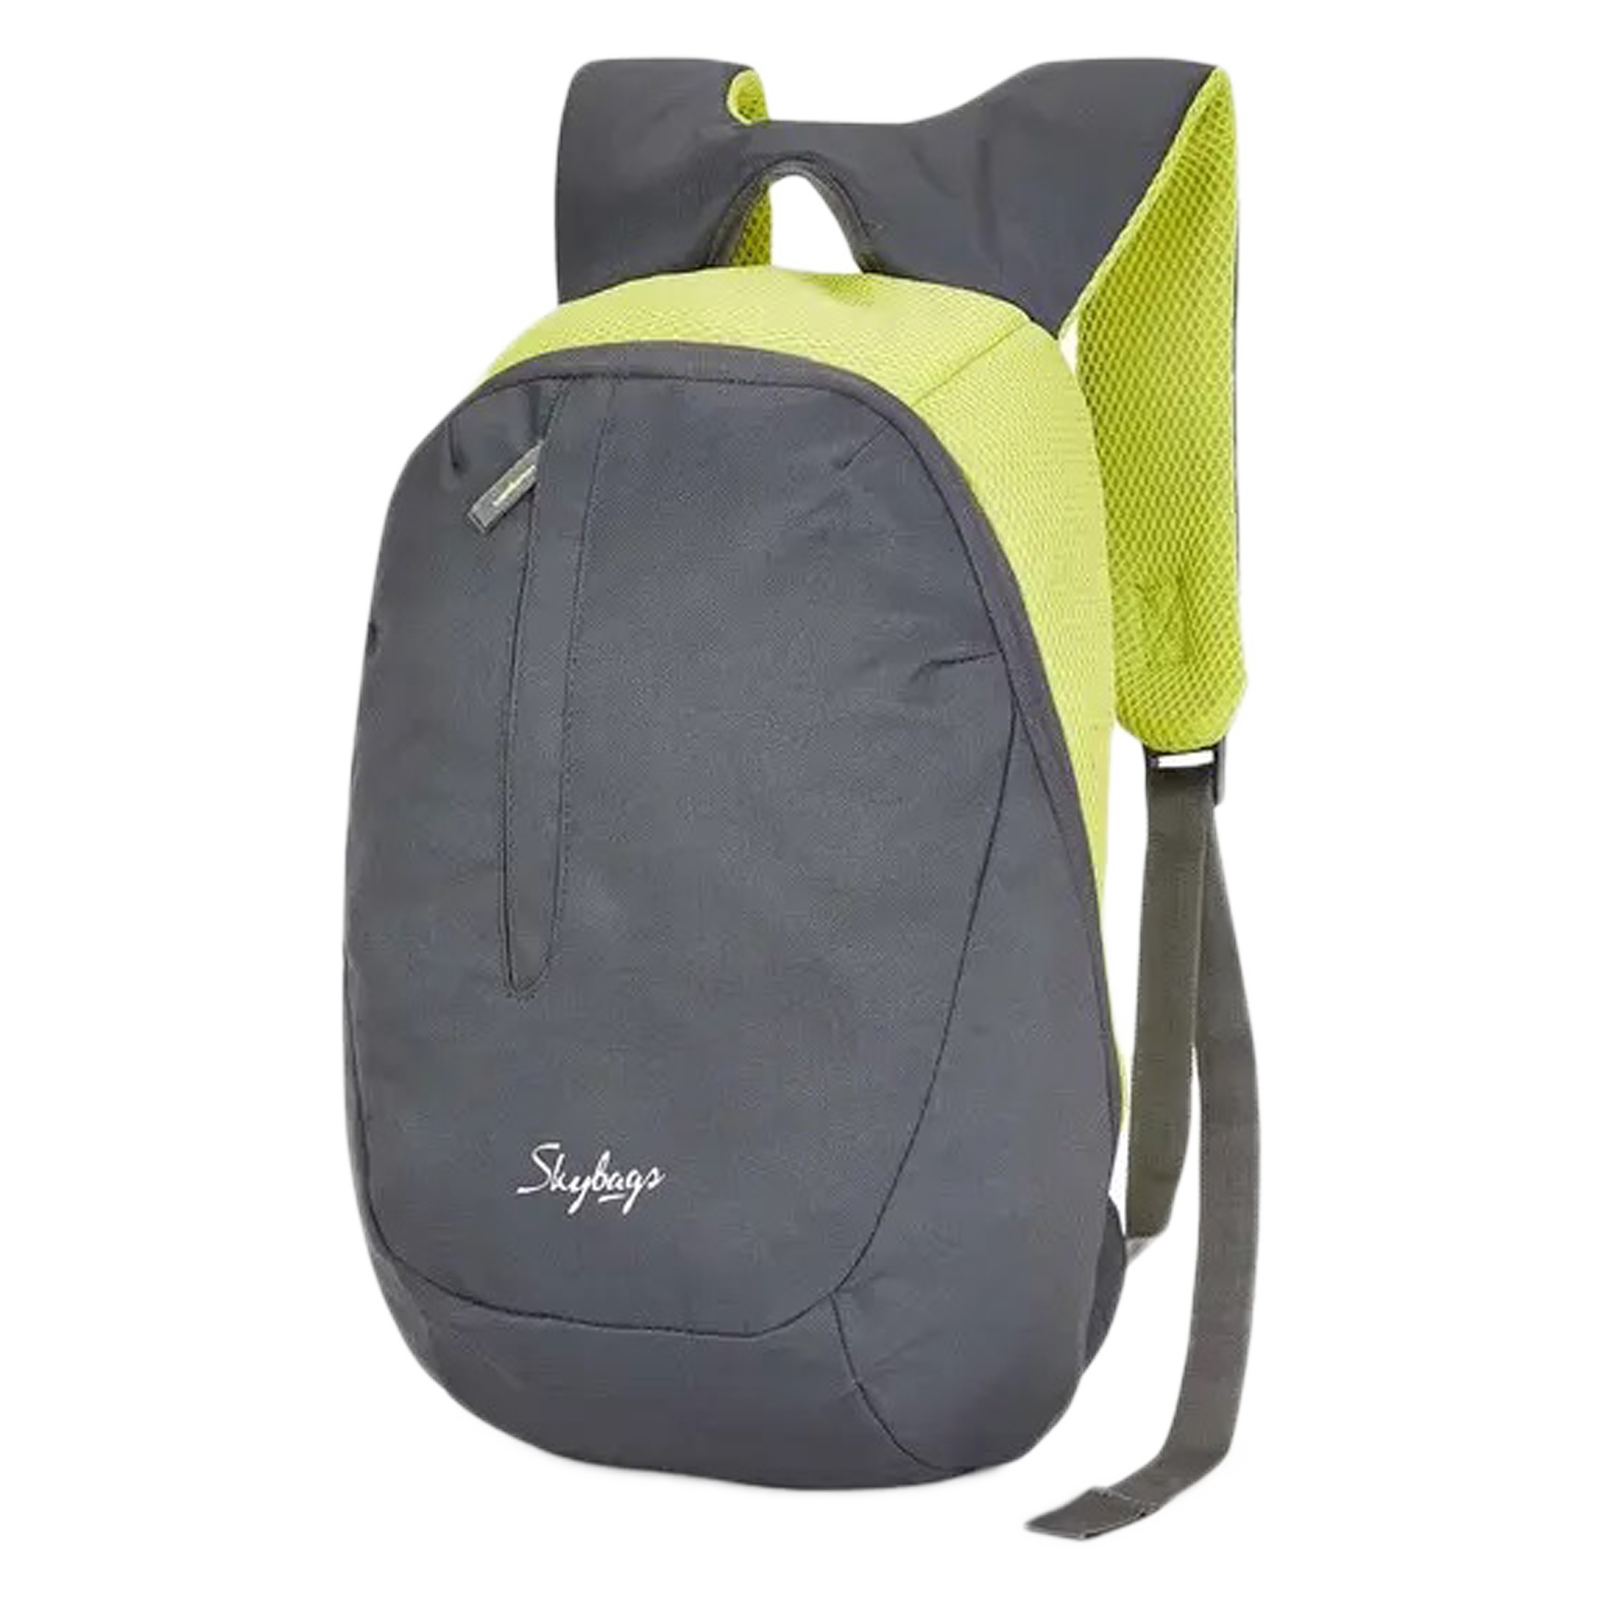 SKYBAGS NAVY BLUE YELLOW PADDED BACKPACK